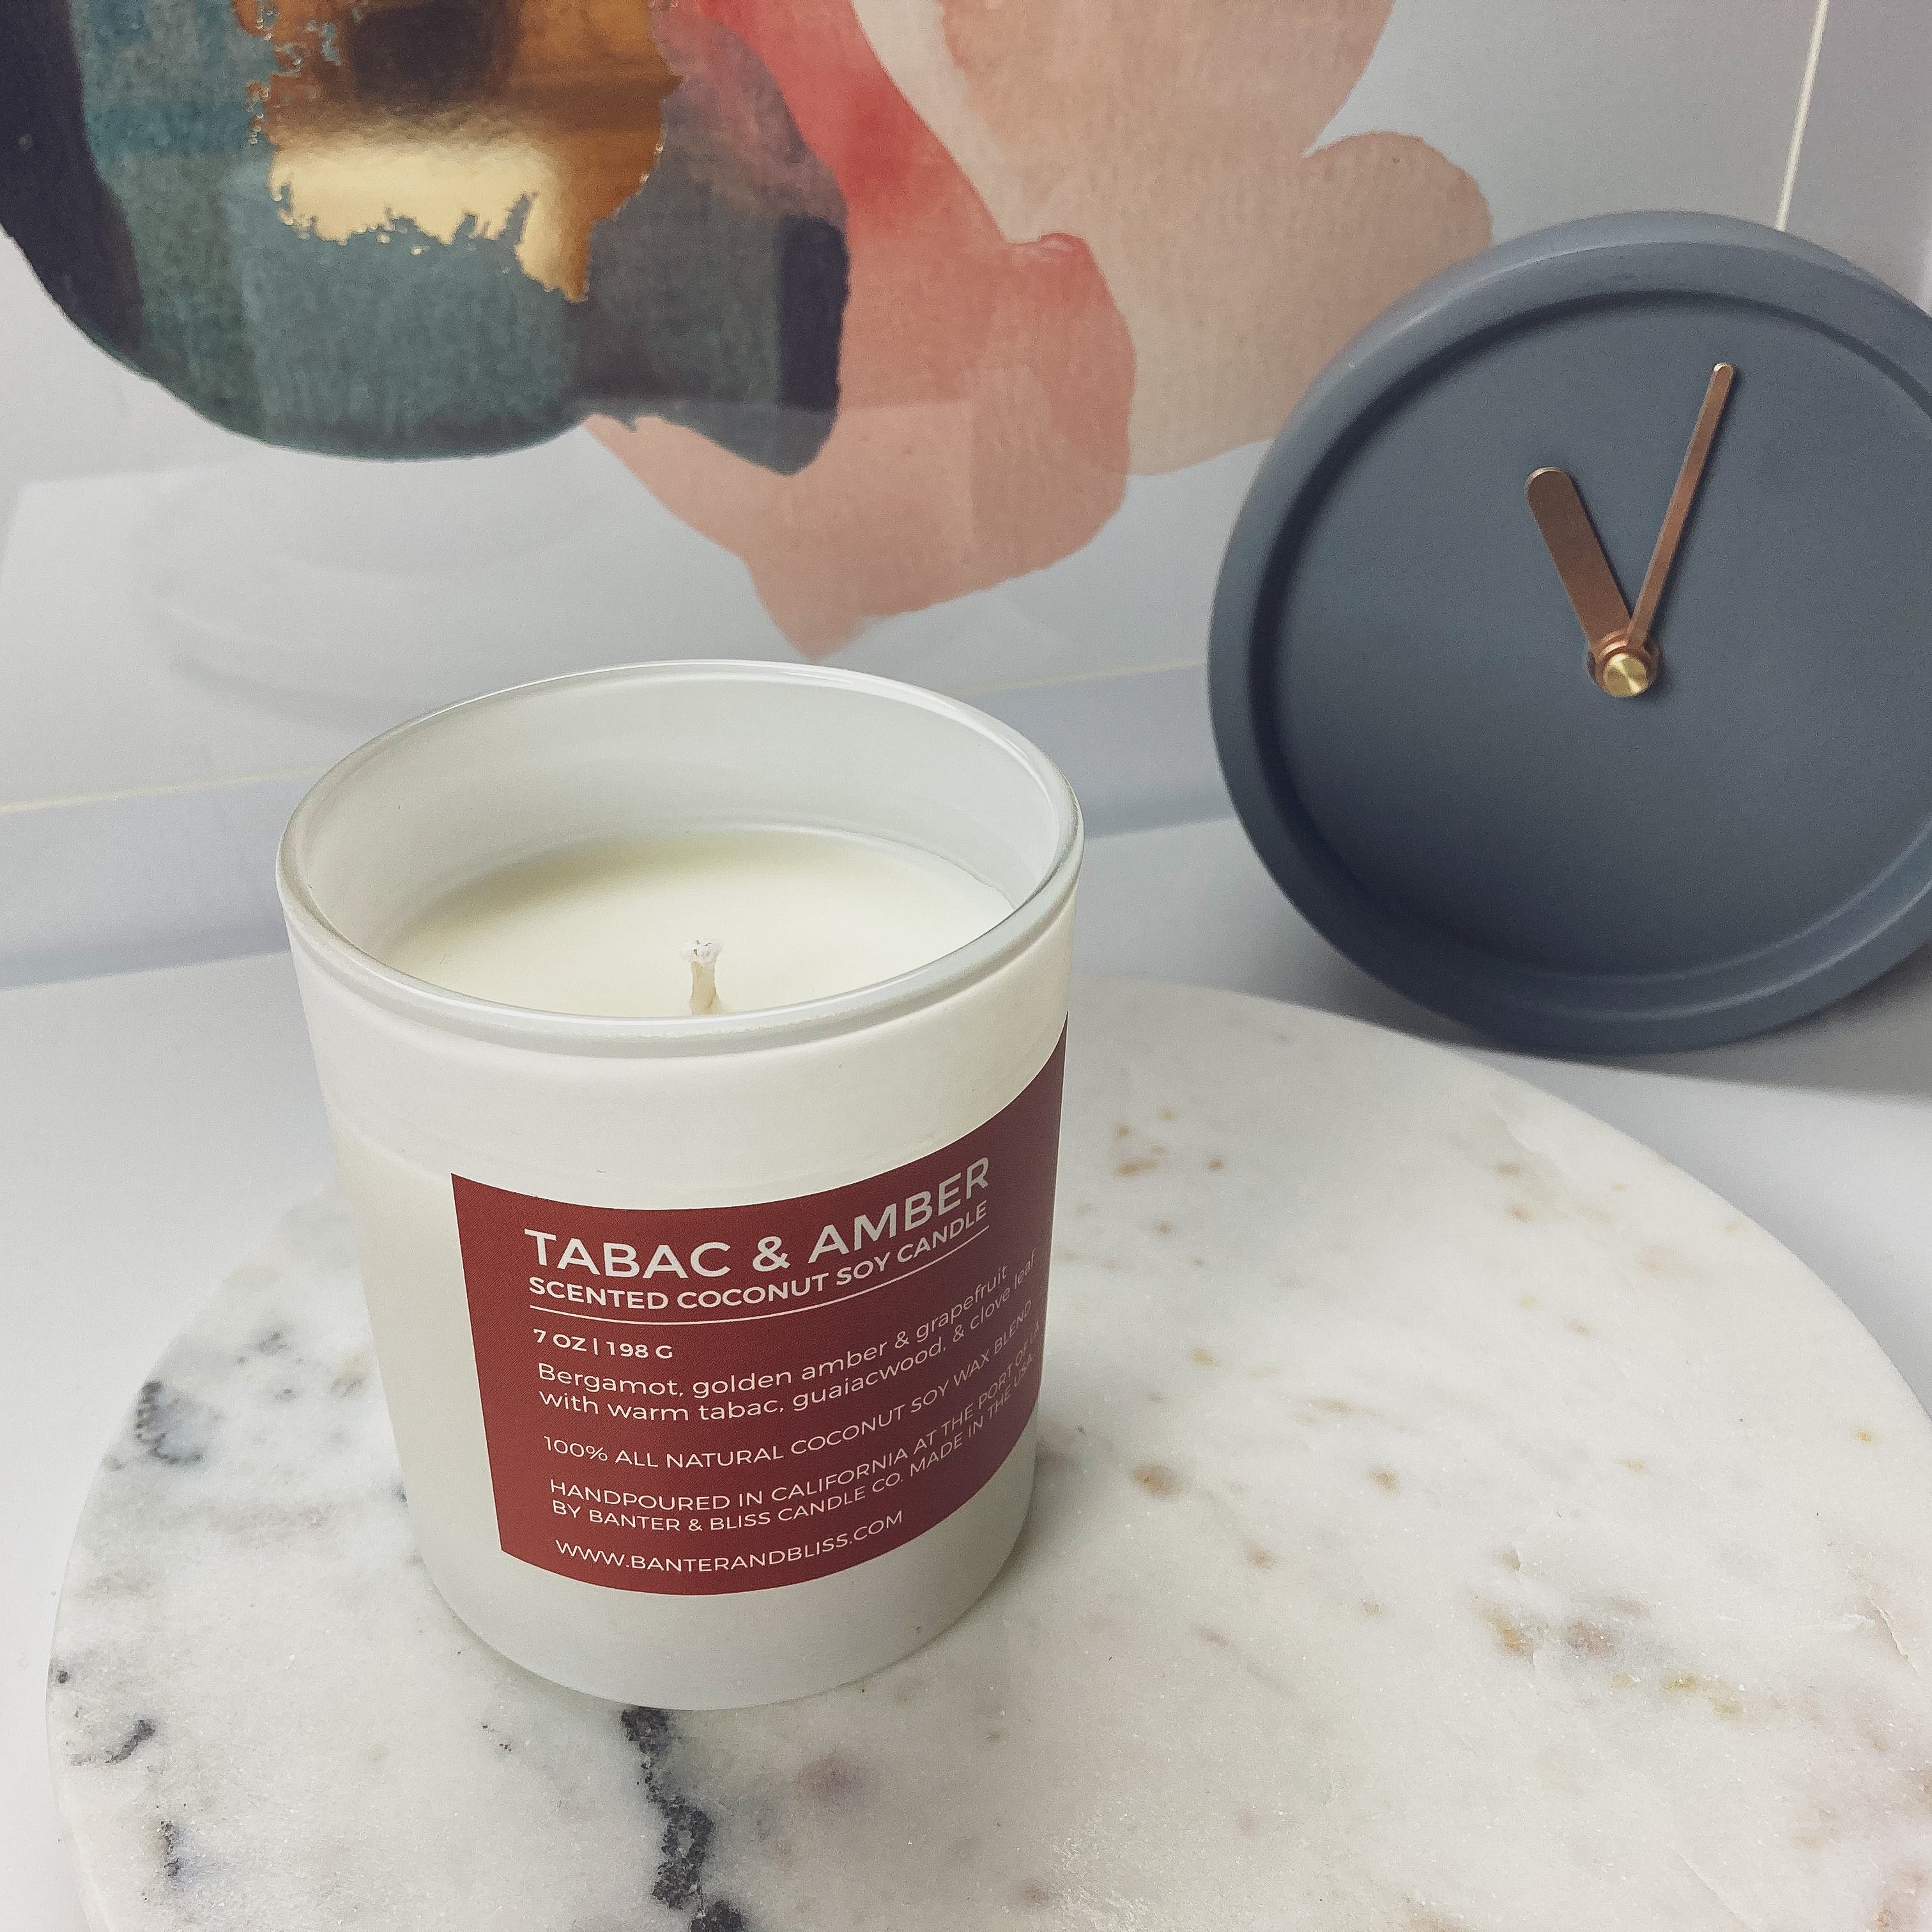 Tabac & Amber. 7 oz. Scented Coconut Soy Candle.